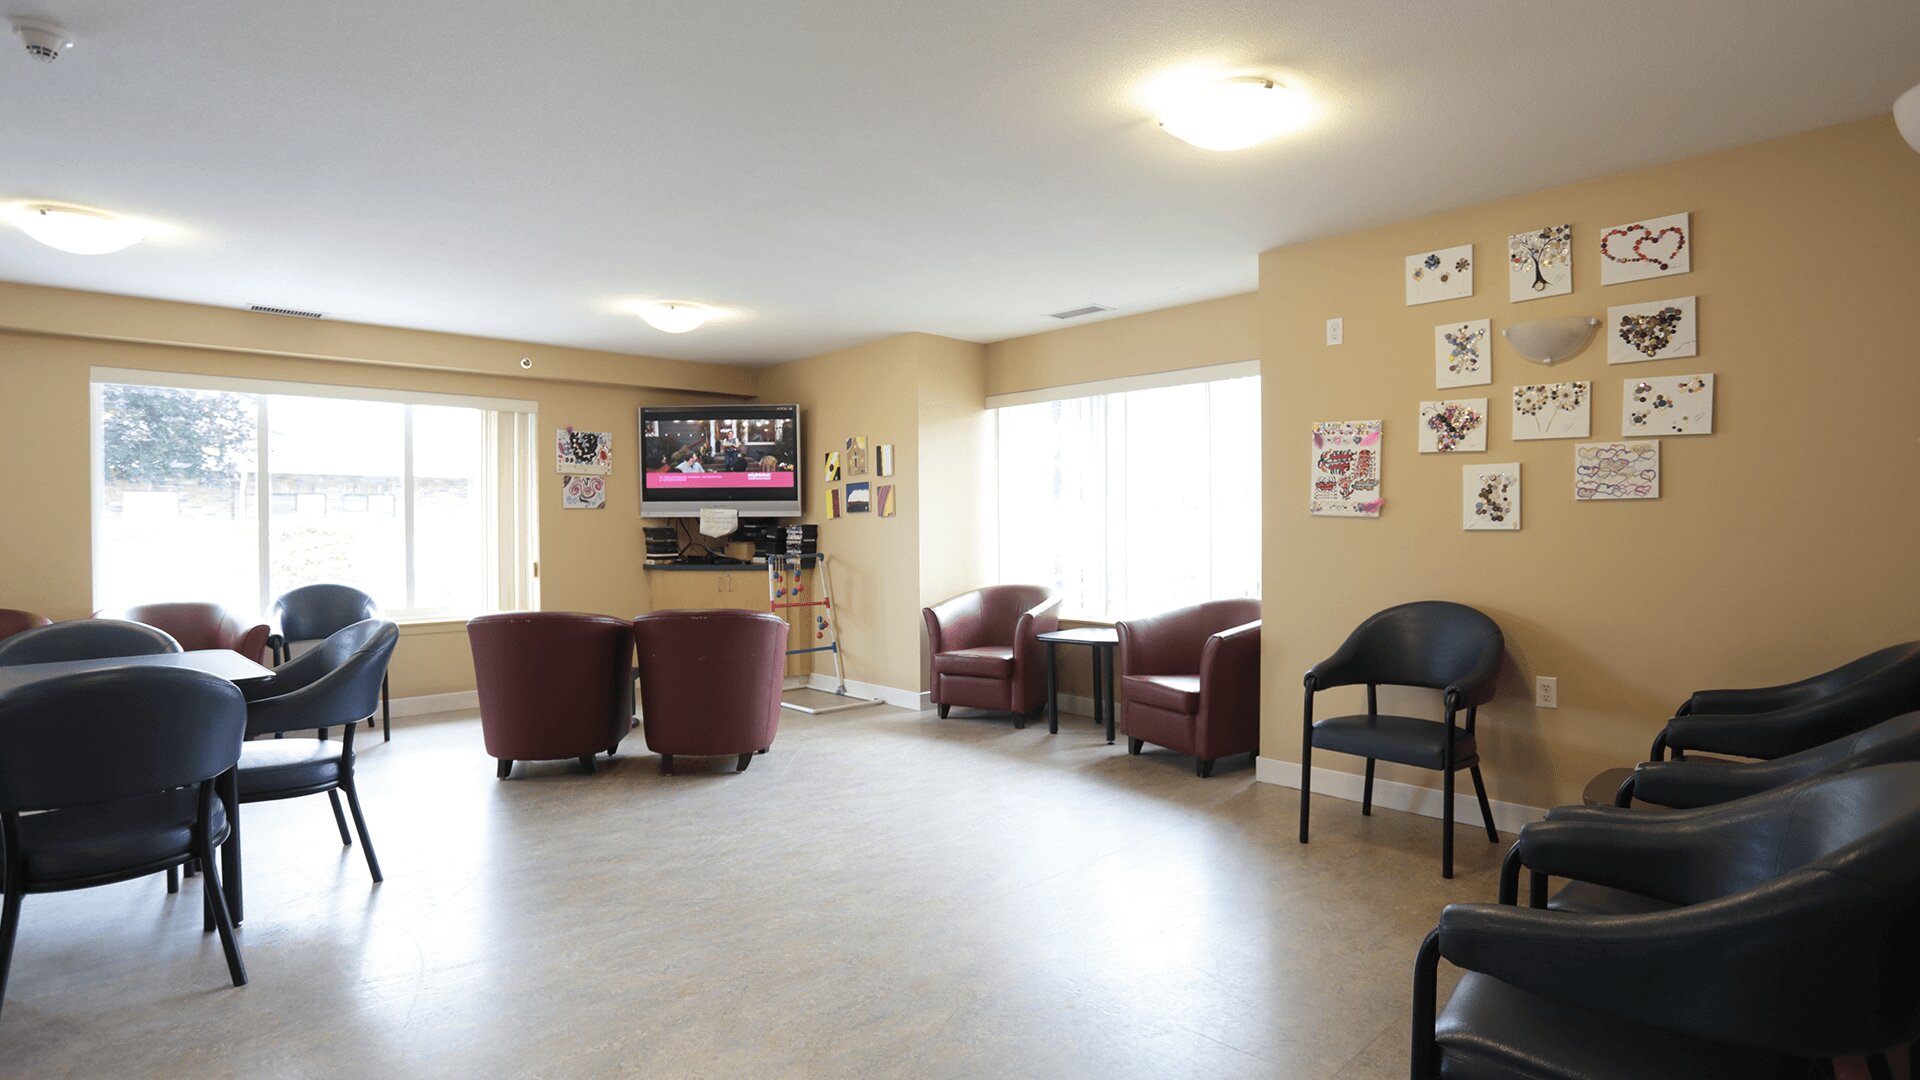 Common area for community activities at WHM